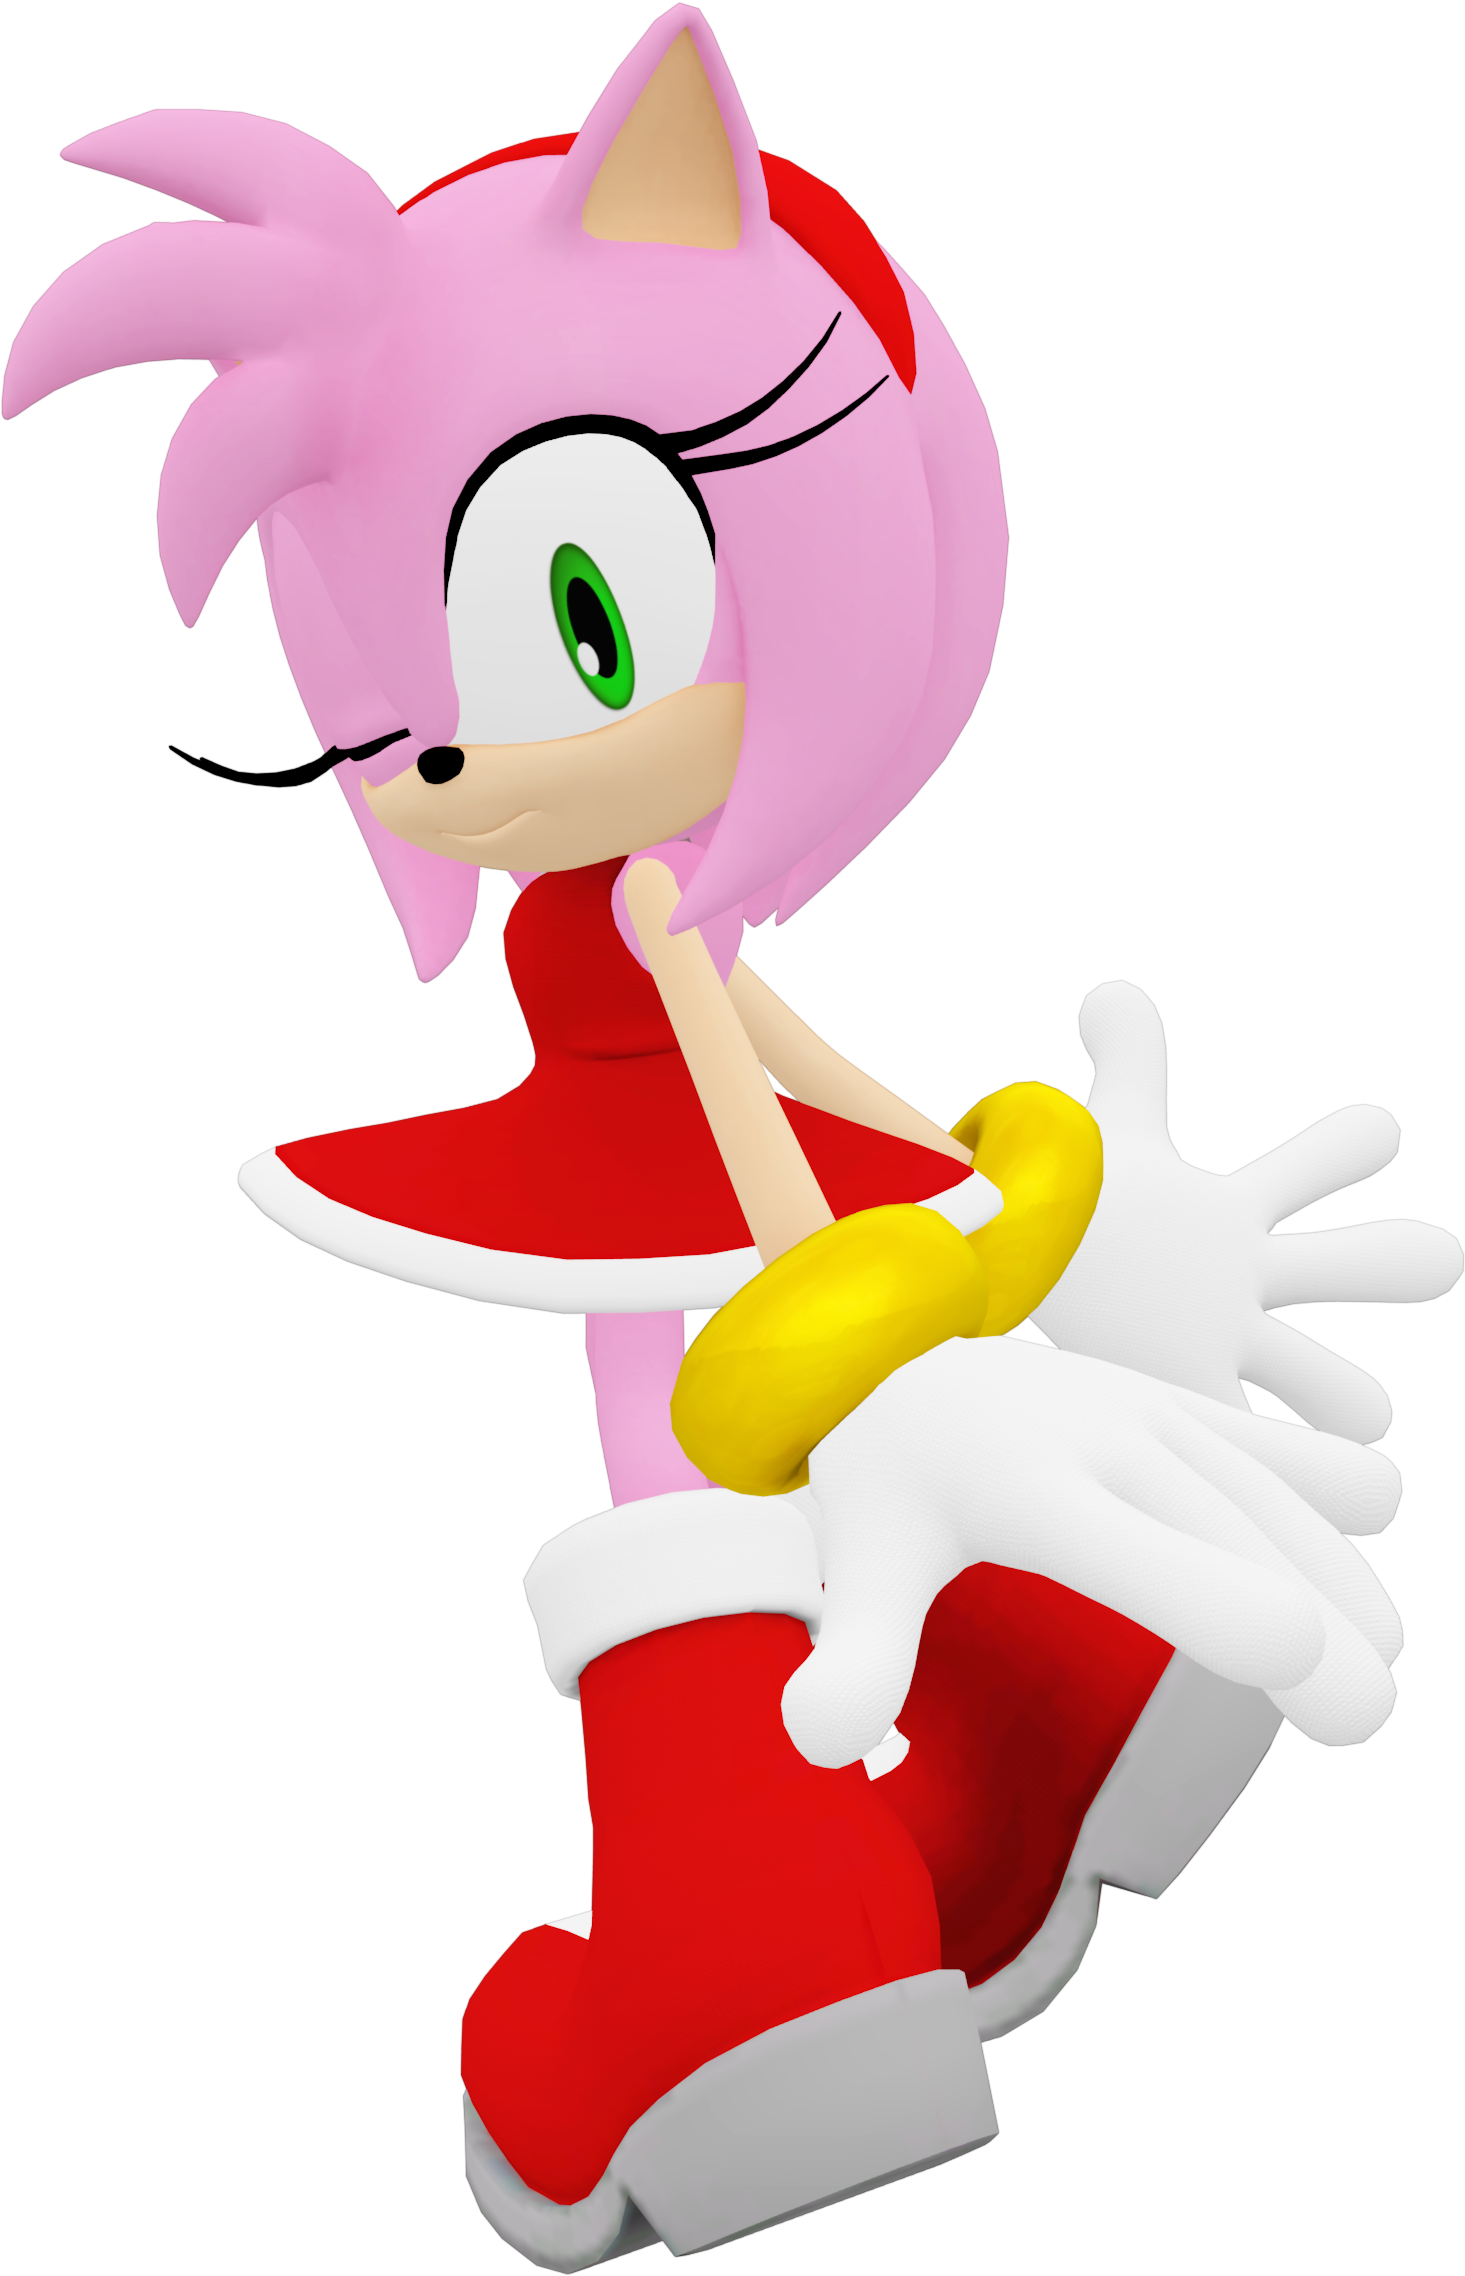 Amy Rose 2017 Render By Detexki99 - Amy Rose Render (2500x2500)